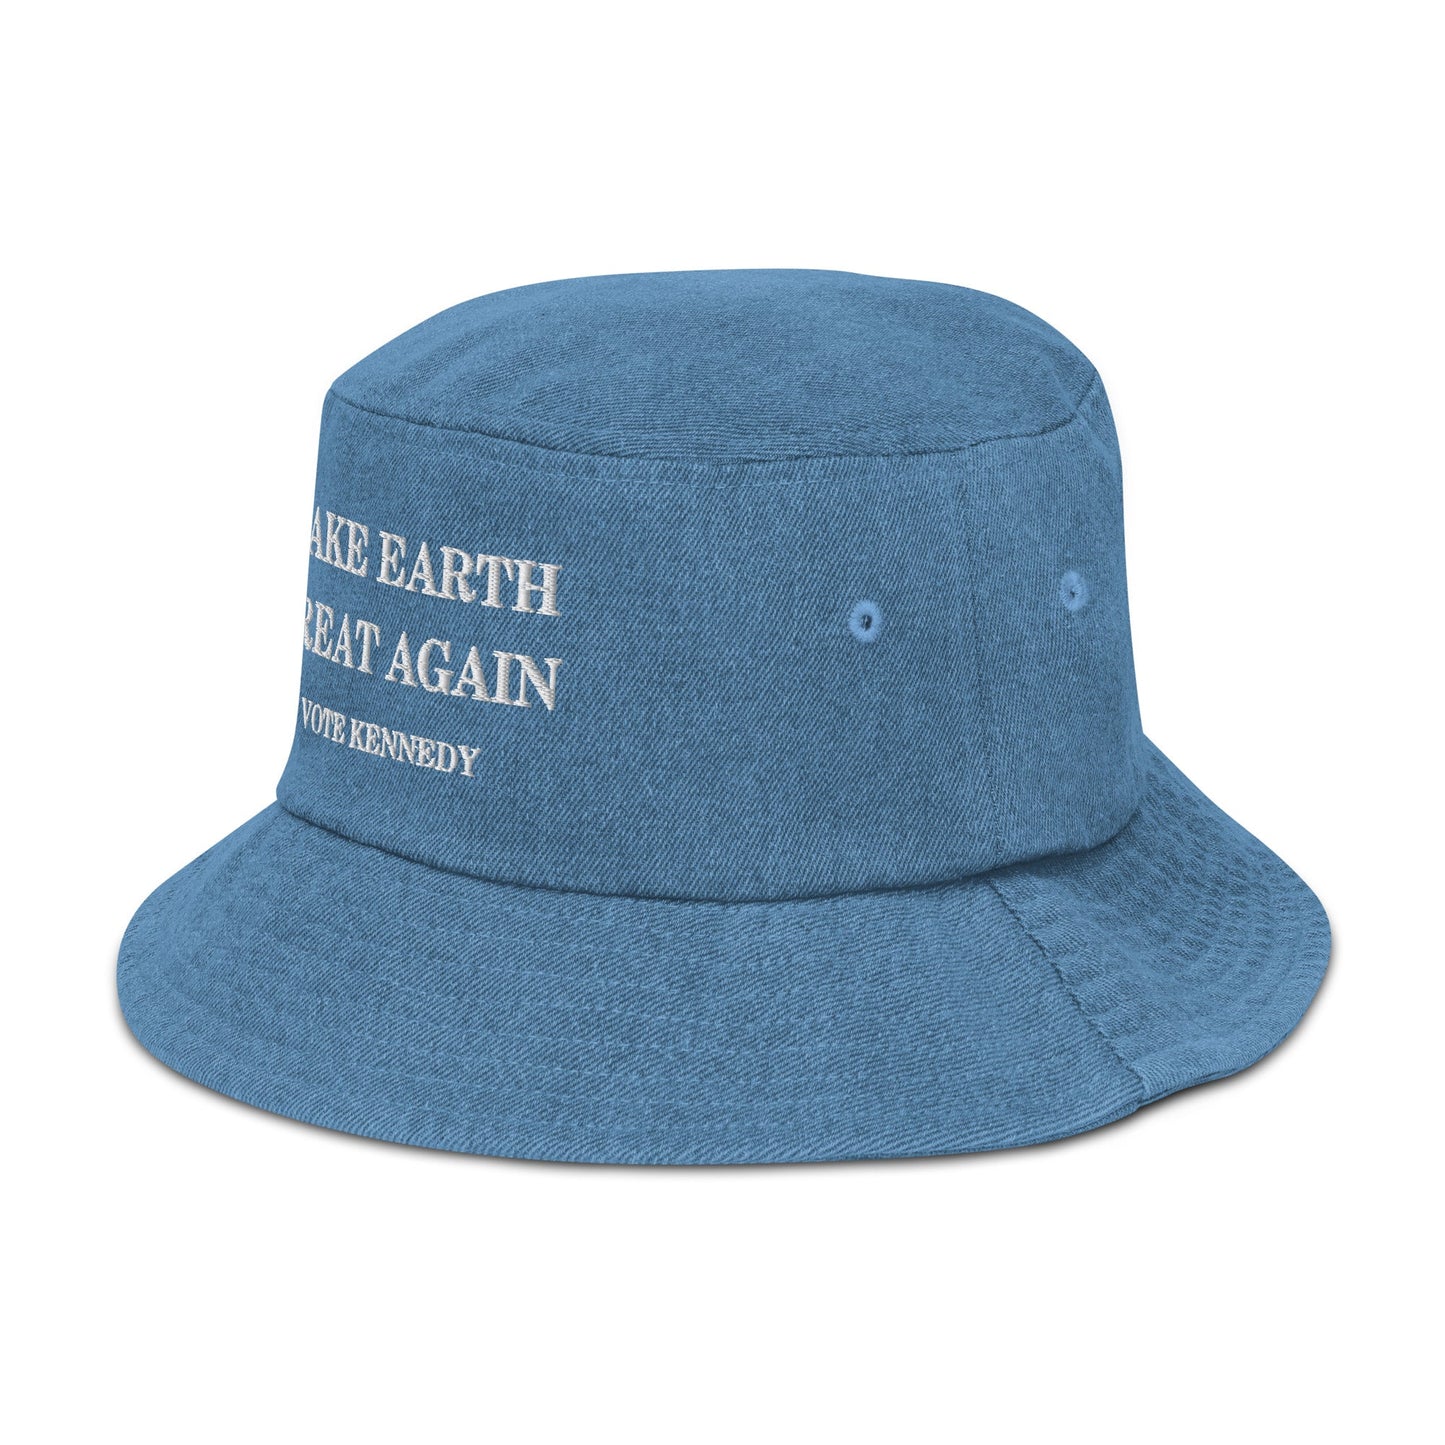 Make Earth Great Again Denim Bucket Hat - TEAM KENNEDY. All rights reserved